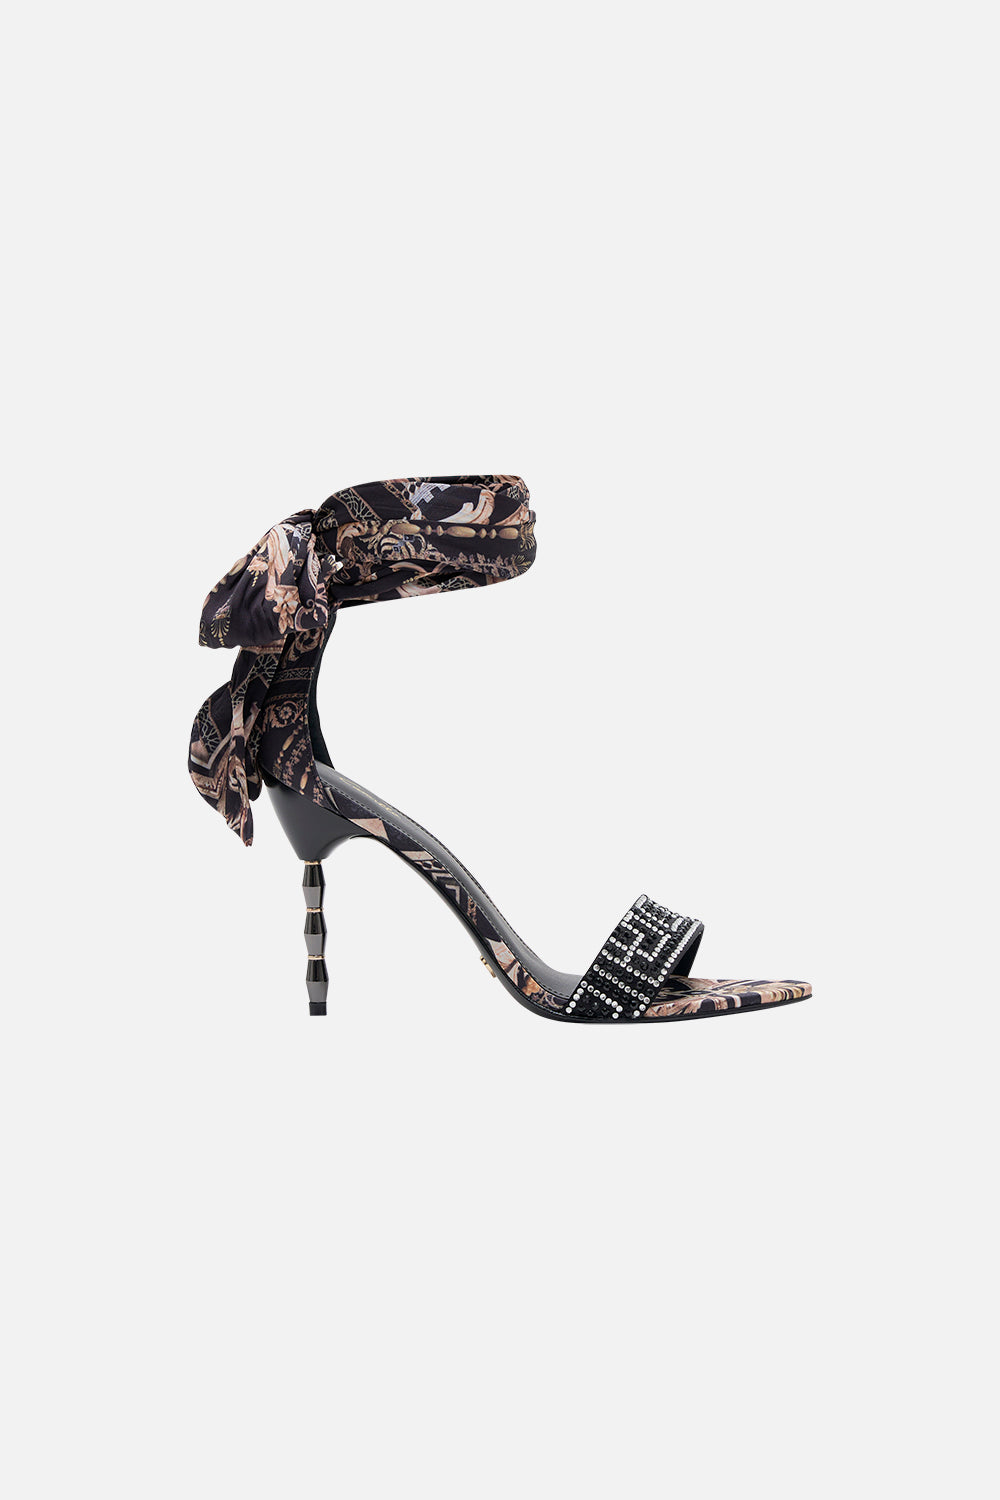 Product view of CAMILLA wrap tie heels in Duomo Dynasty print